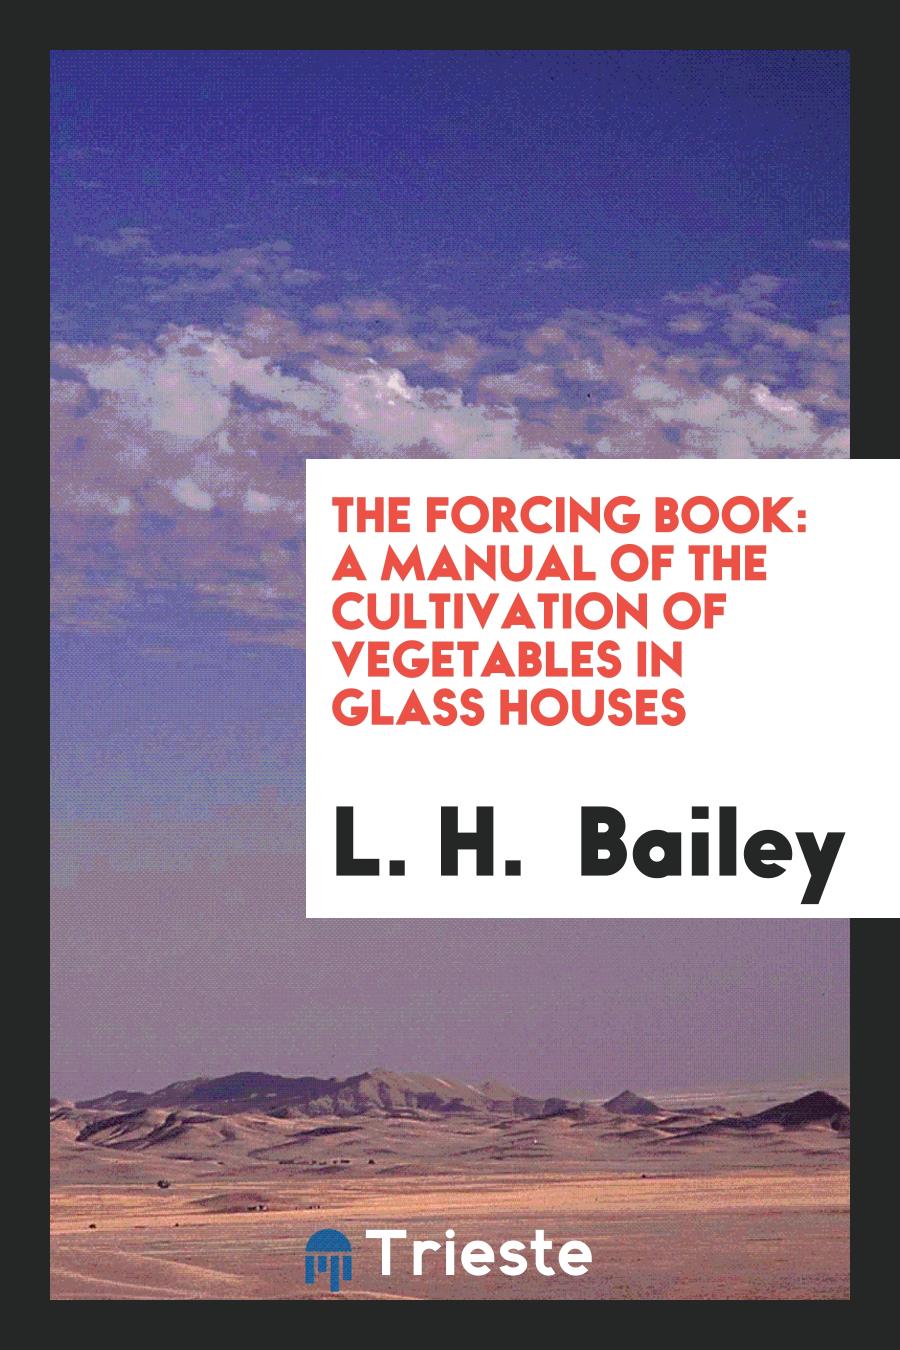 The Forcing Book: A Manual of the Cultivation of Vegetables in Glass Houses